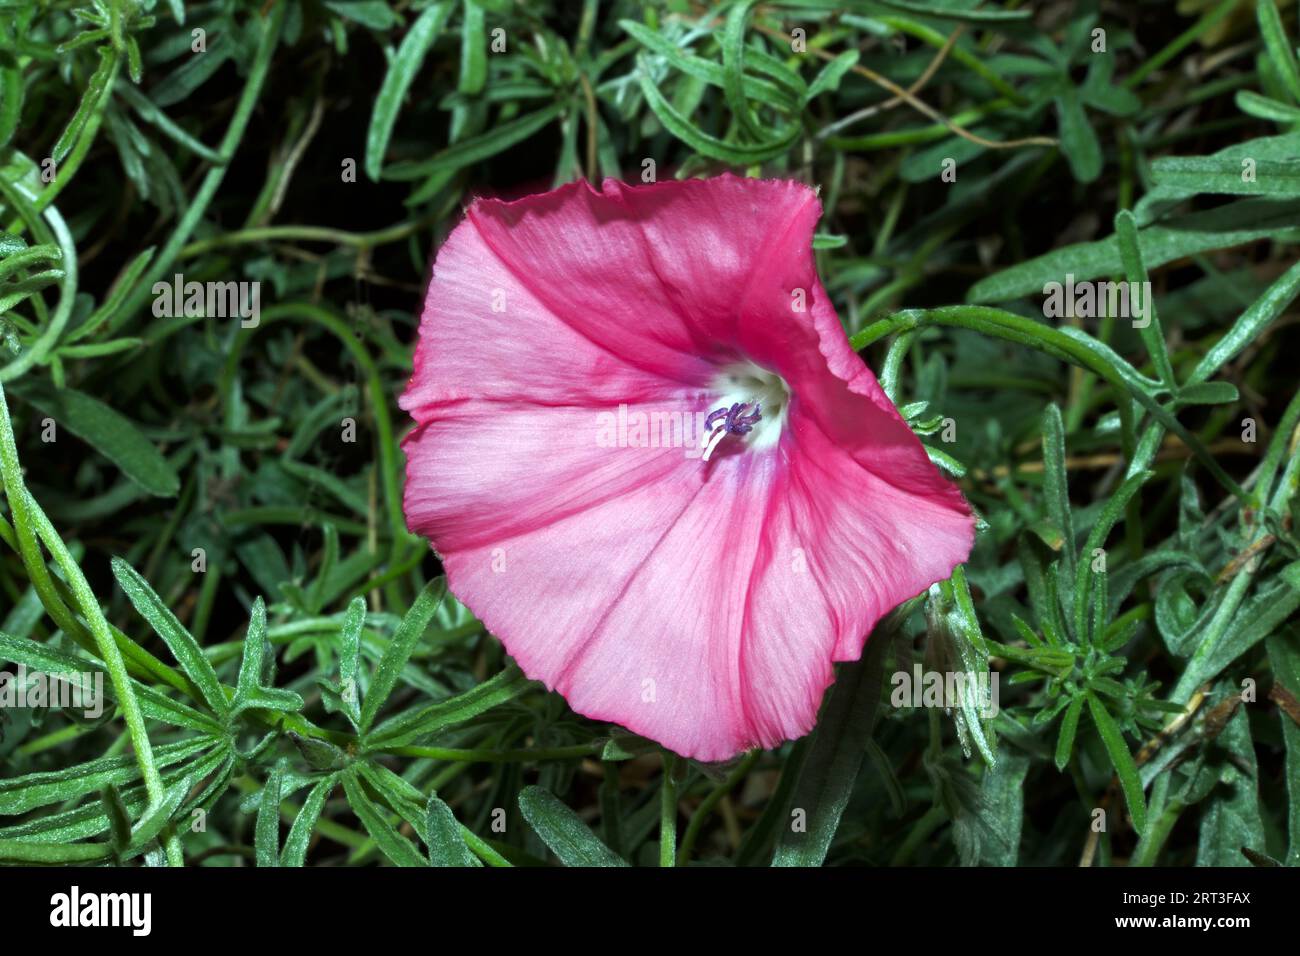 Convolvulus althaeoides (mallow bindweed) is a species of morning glory native to the Mediterranean Basin and Macaronesia. It is a climbing plant. Stock Photo